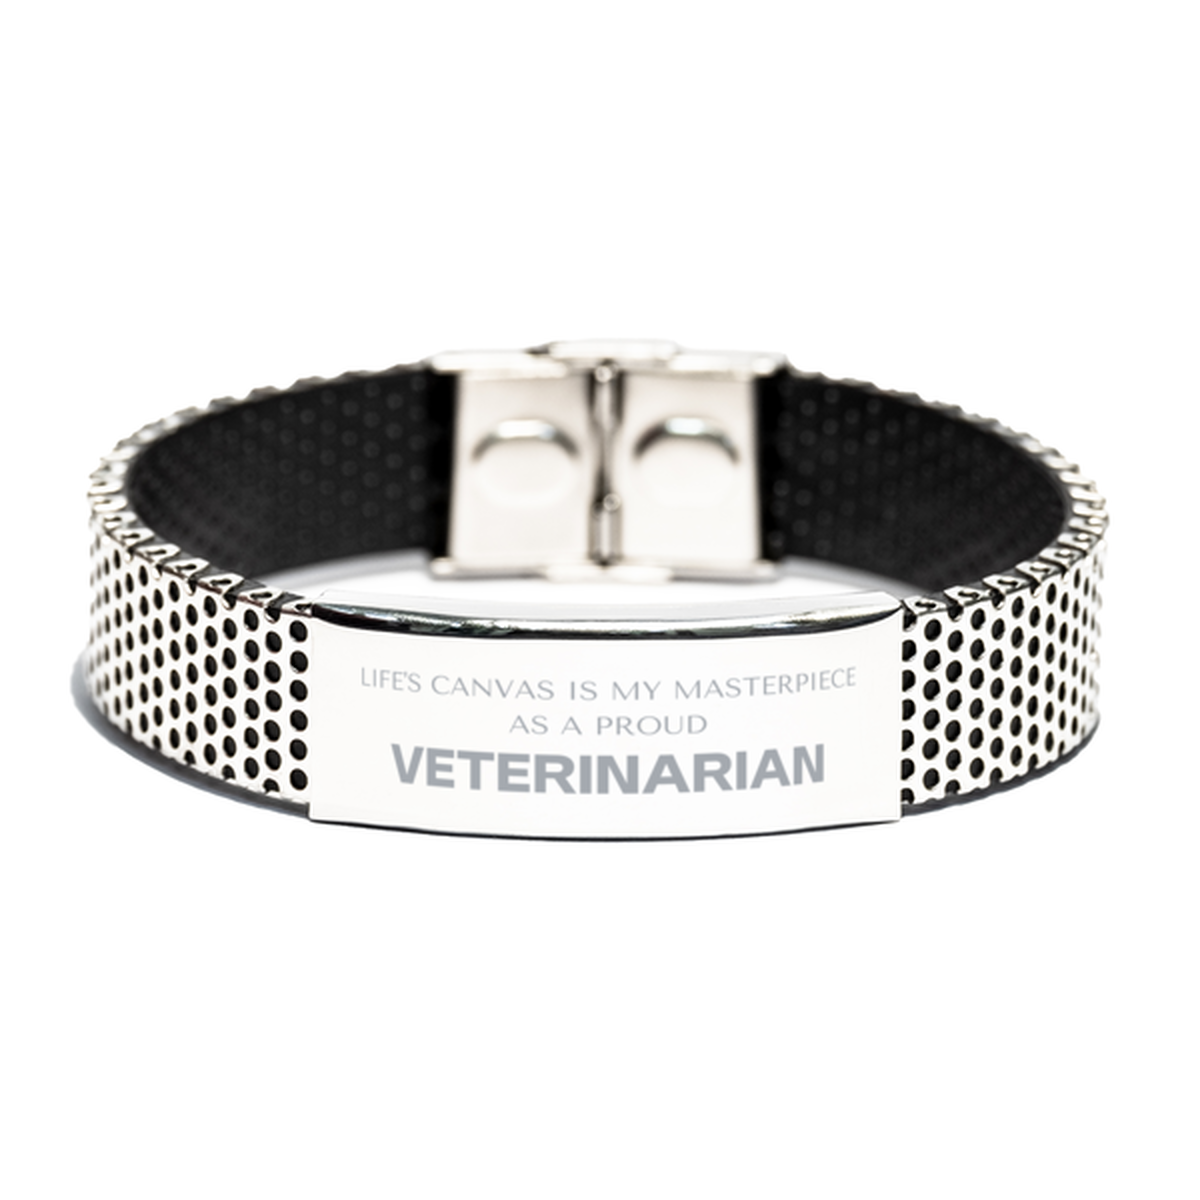 Proud Veterinarian Gifts, Life's canvas is my masterpiece, Epic Birthday Christmas Unique Stainless Steel Bracelet For Veterinarian, Coworkers, Men, Women, Friends